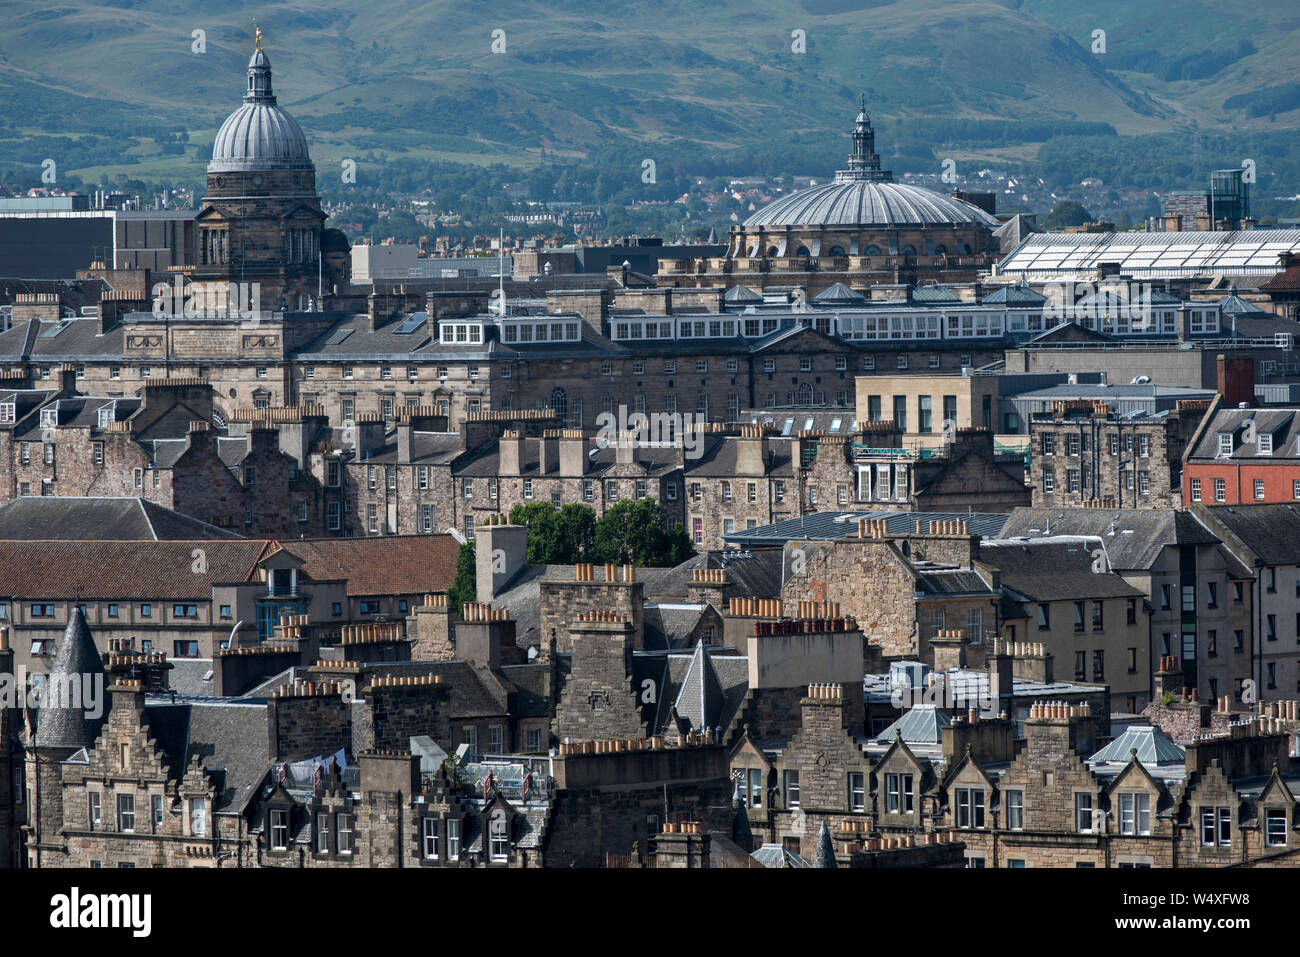 The view from Calton Hill looking South towards the dome of Edinburgh University's Old College and in the distance the Pentland Hills. Stock Photo